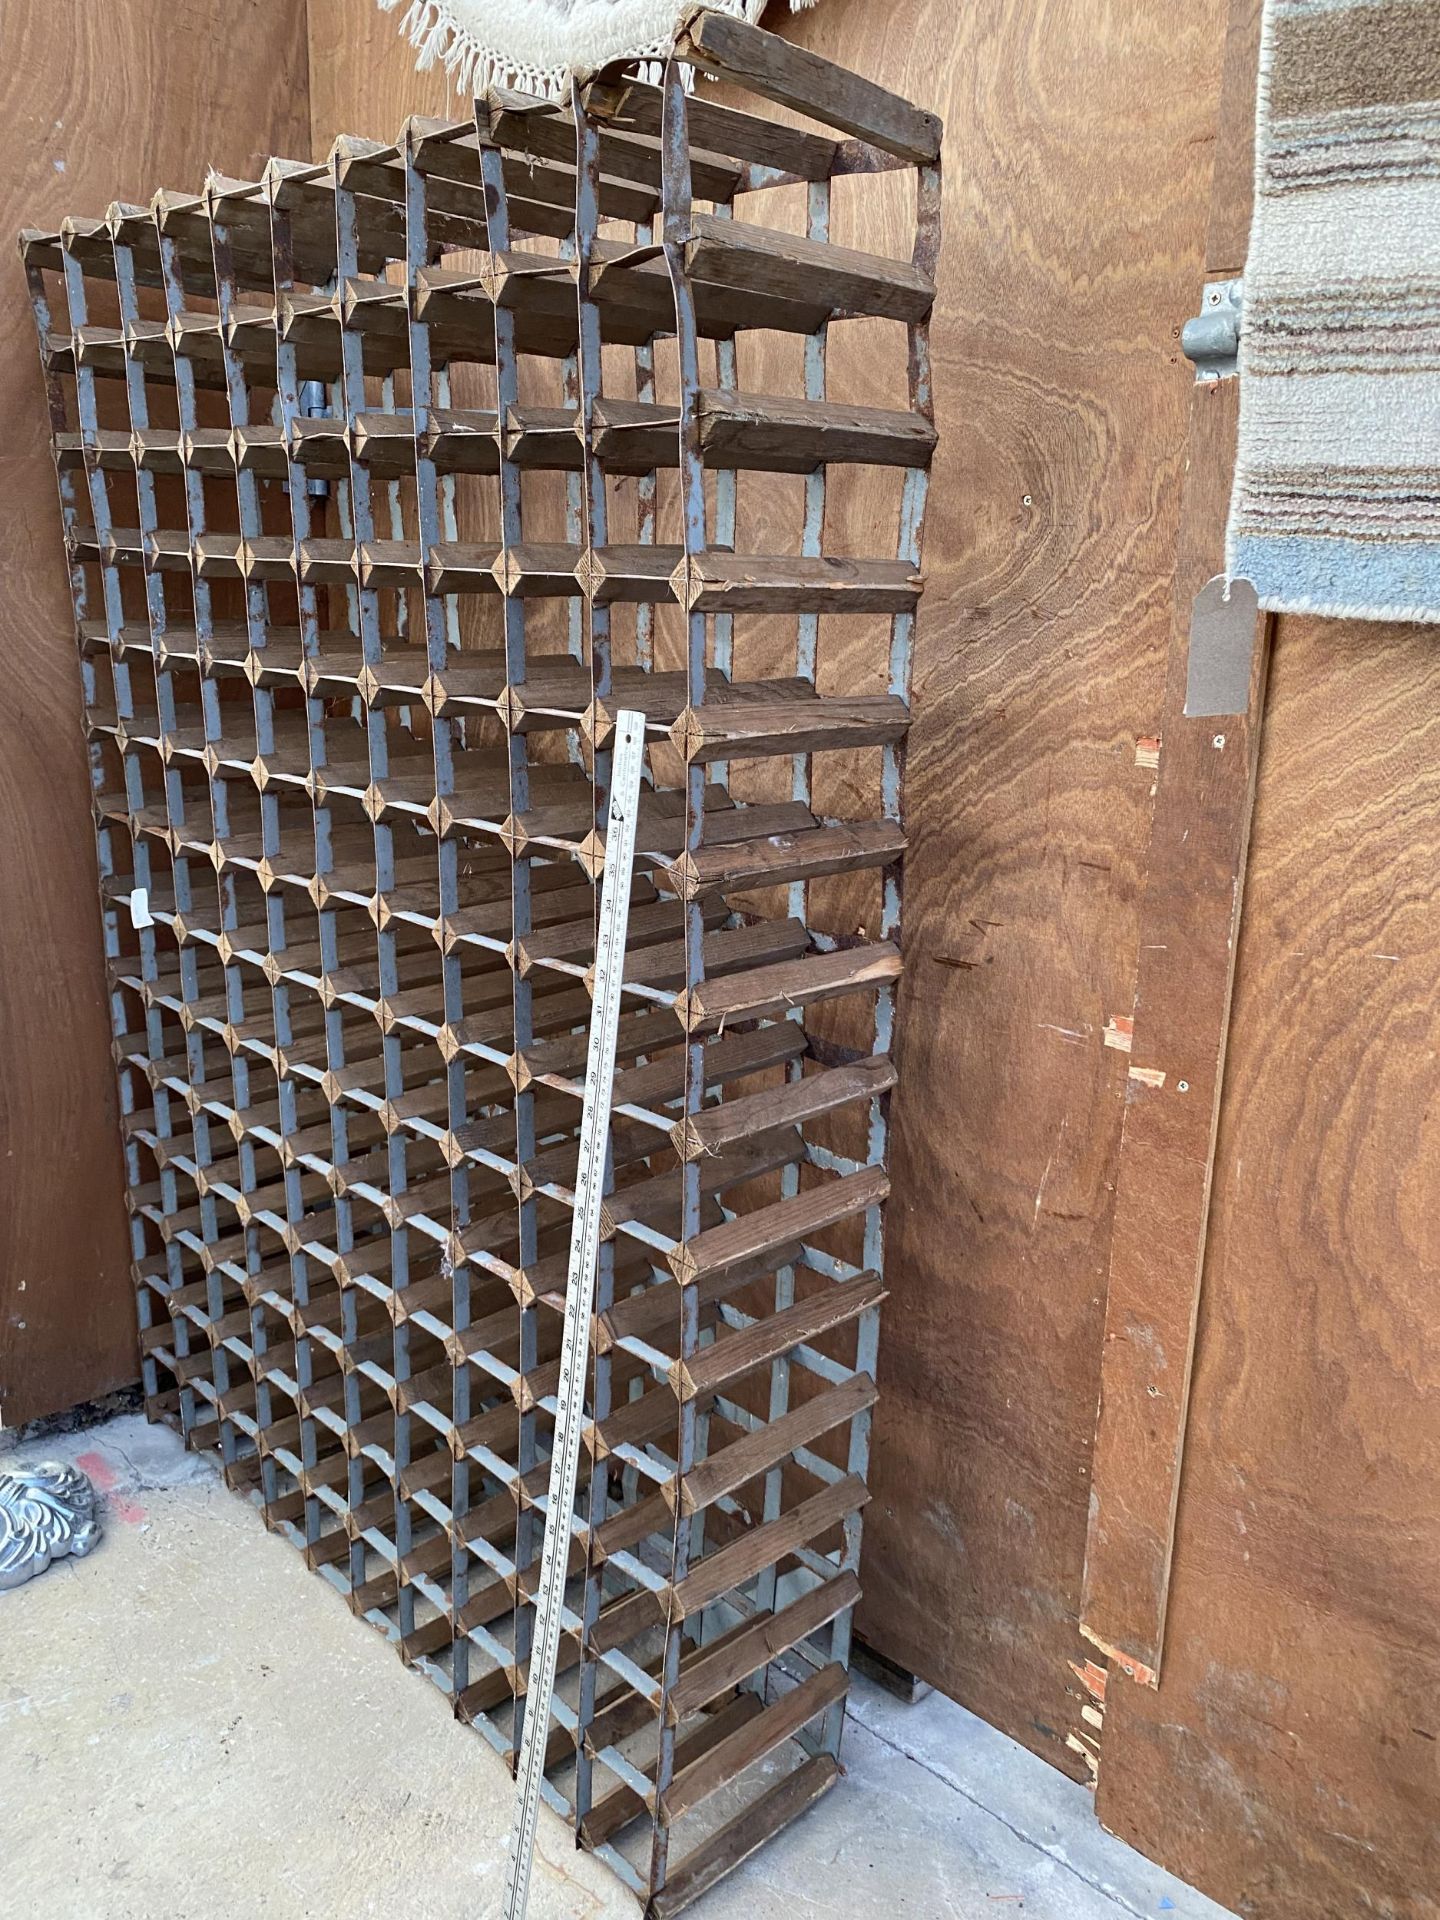 A WOODEN AND METAL 140 BOTTLE WINE RACK - Image 3 of 3